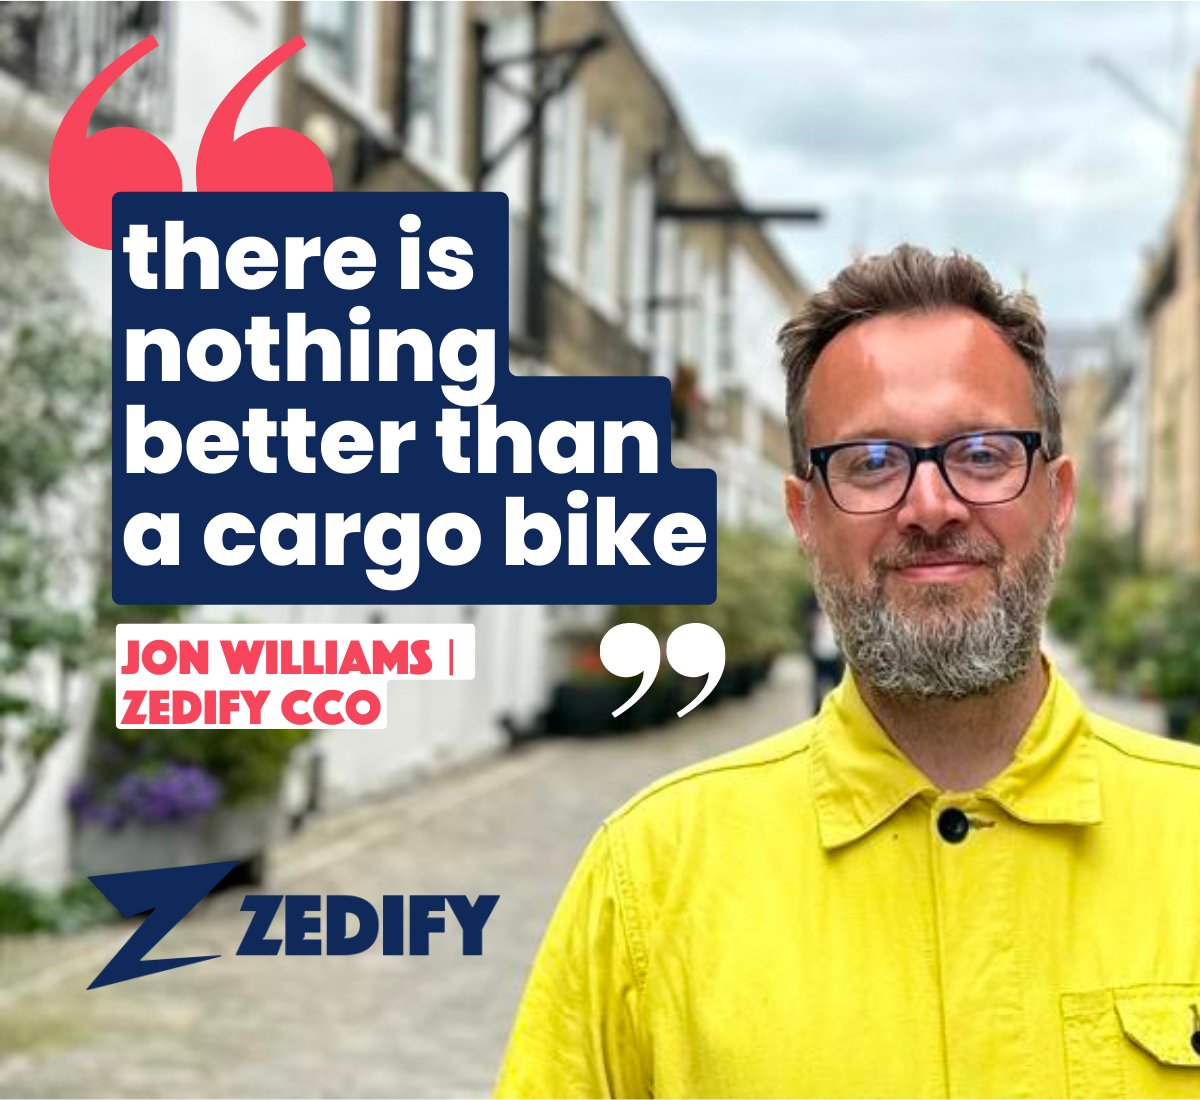 When it comes to urban deliveries...

Cargo bikes win every time.

Check out Zedify CCO Jon's chat with @ZagDaily here: zagdaily.com/featured/retai…

#cargobikes #cargobikerevolution #urbantransport #urbaninfrastructure